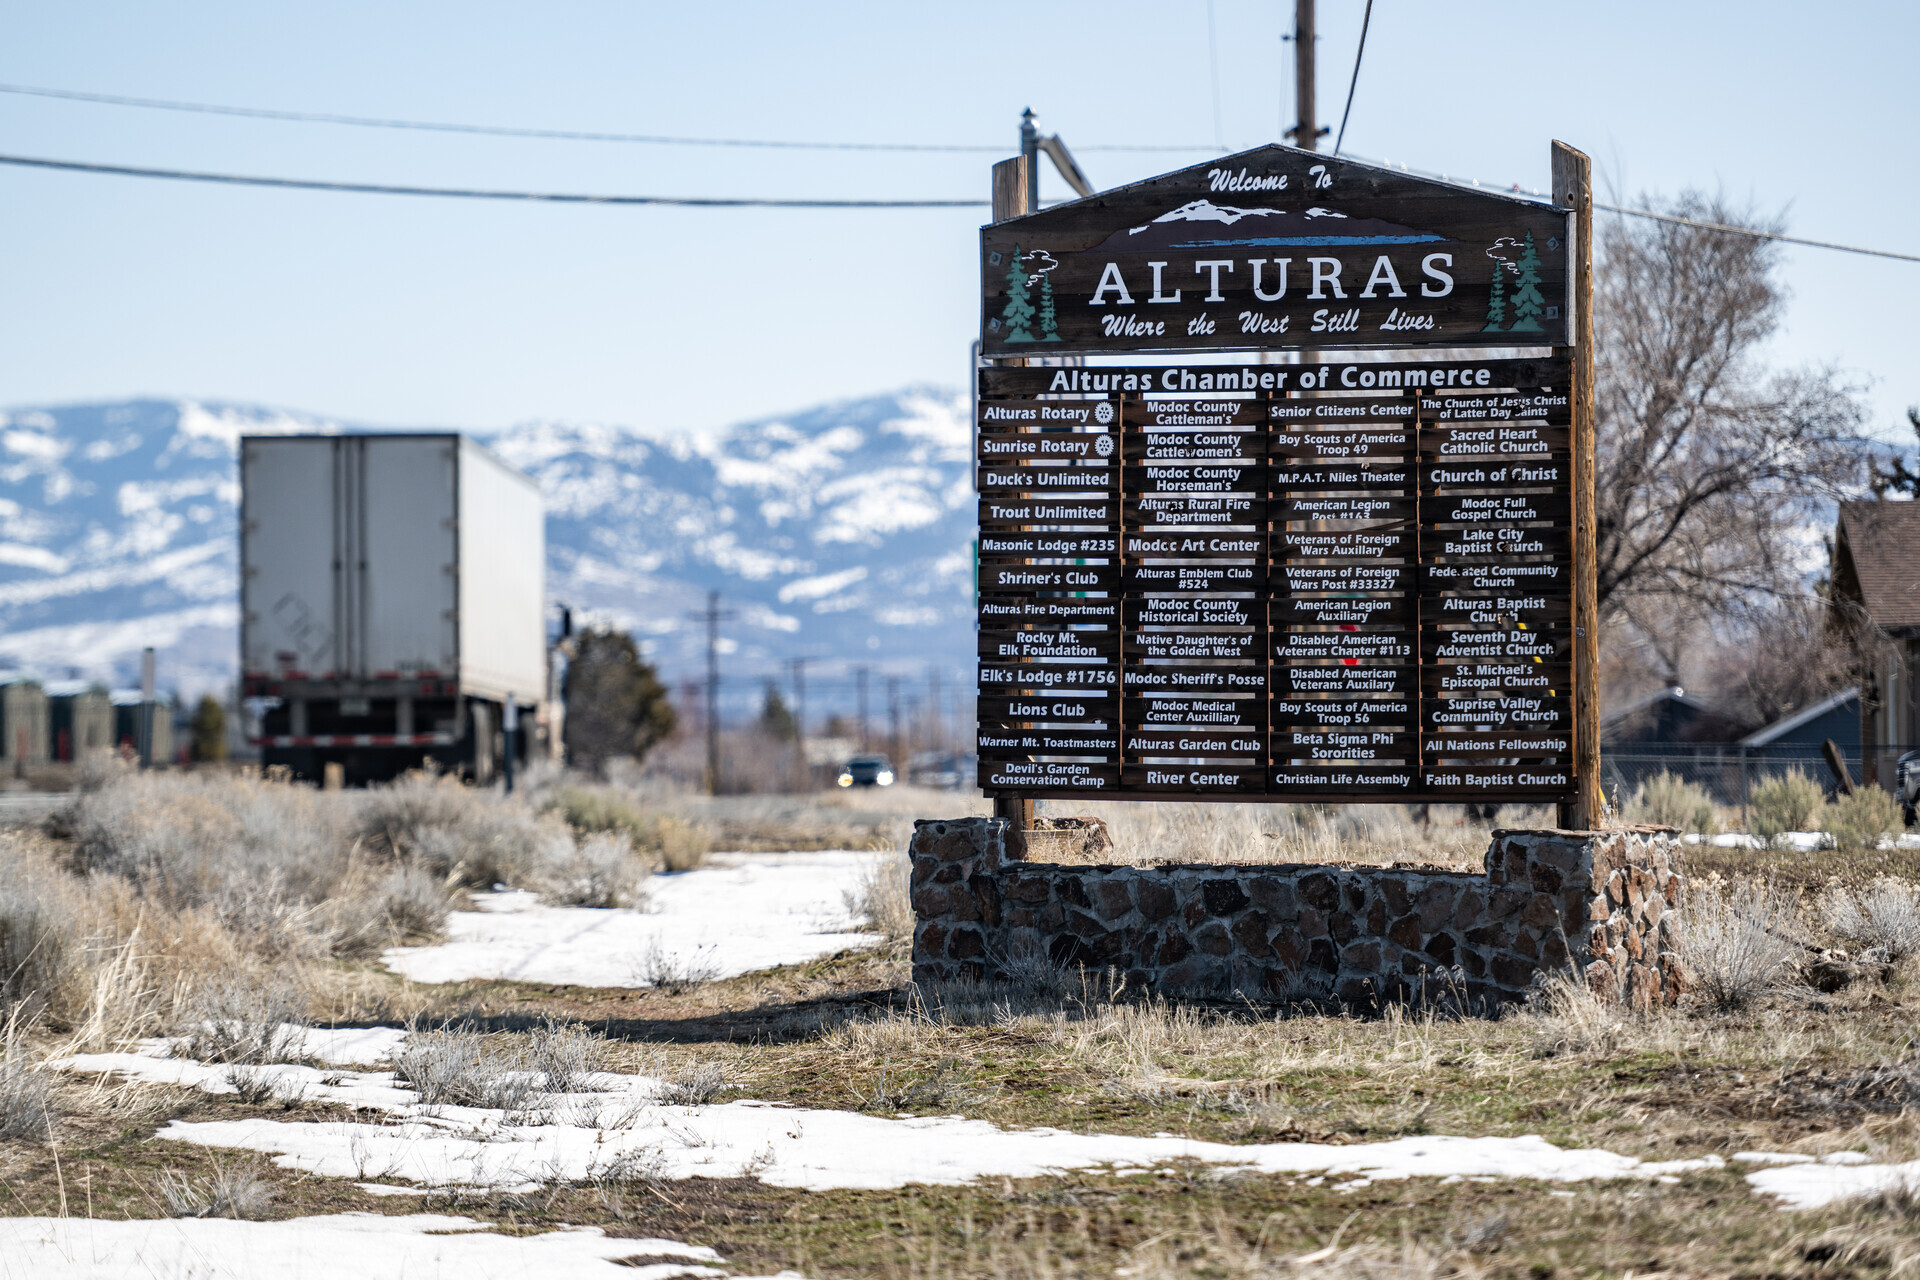 A large, wooden sign in the middle of yellow grass and brush reads "Welcome to Alturas: Where the West Still Lives." A snowy mountain range is seen in the background and a semi truck drives down a country road. Snow is melted on the ground and telephone poles dot the road.